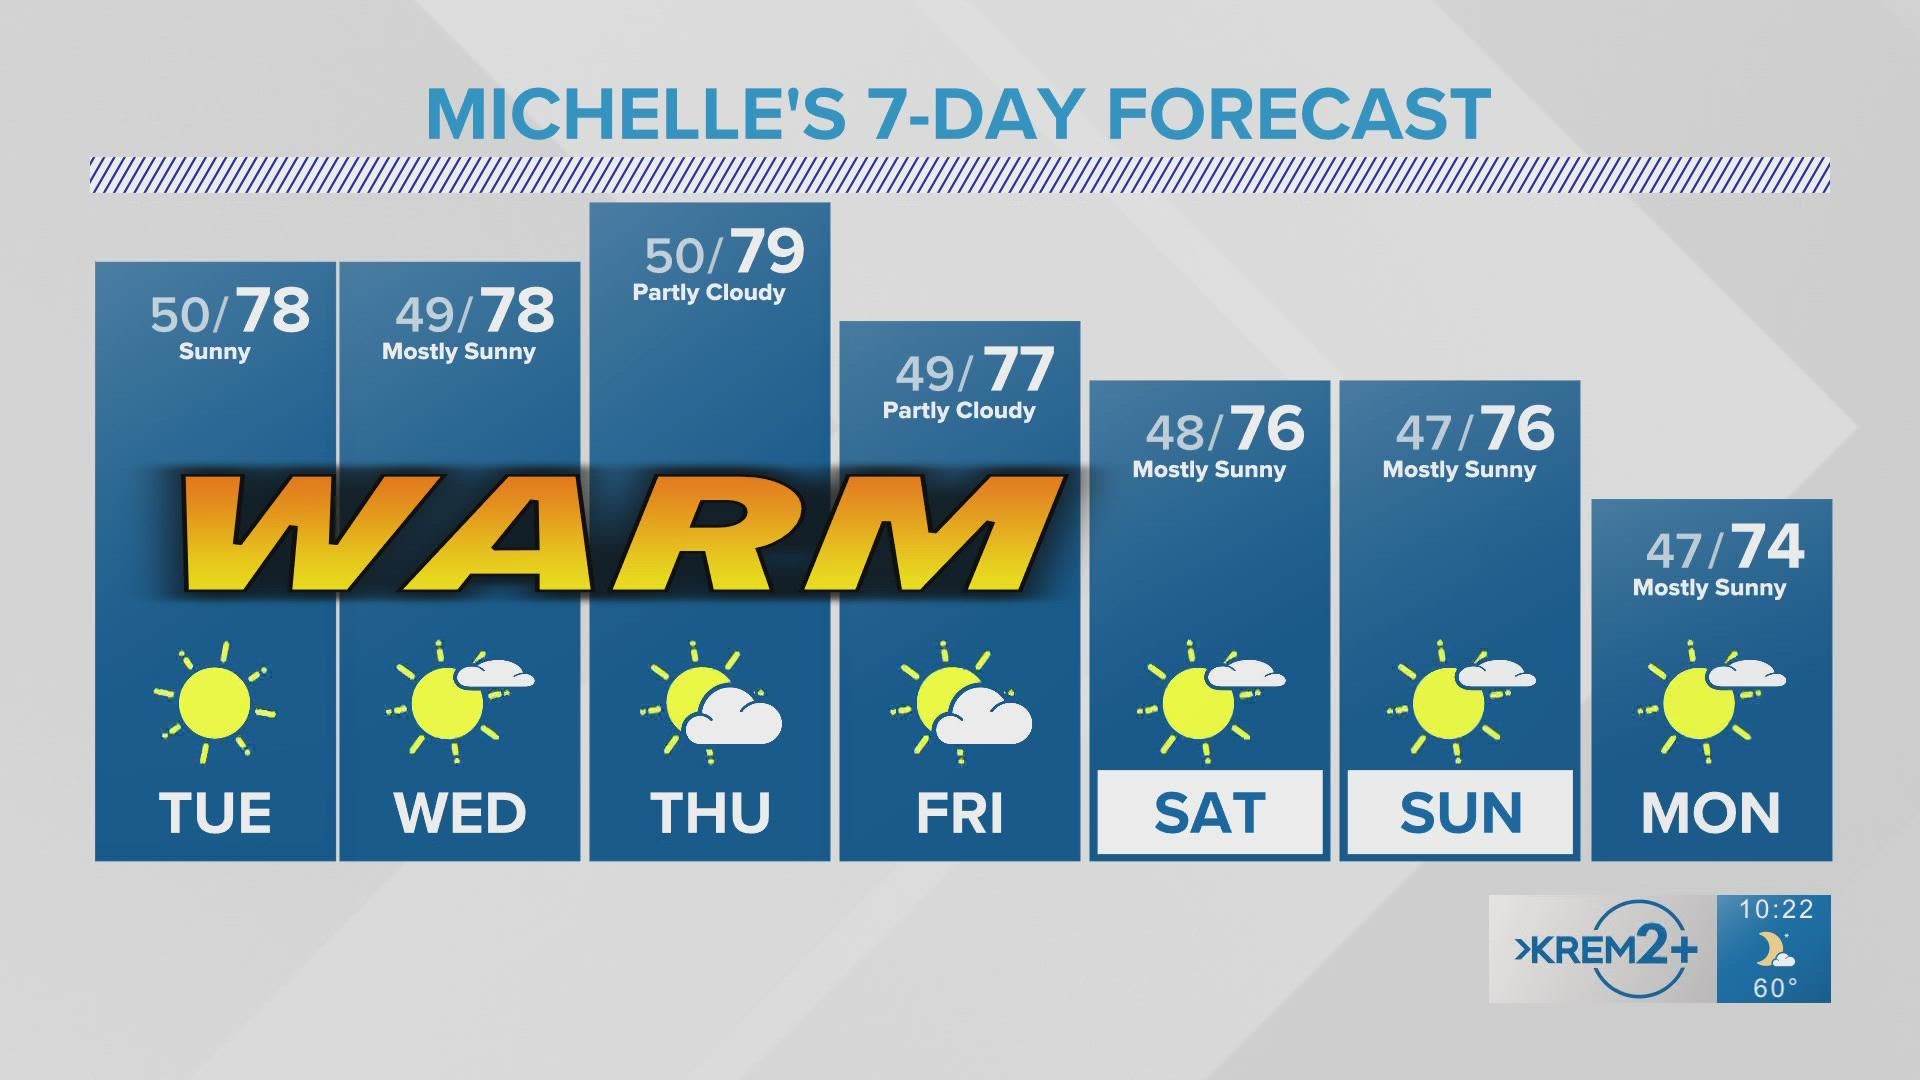 KREM 2 Meteorologist Michelle Boss has the 7-day forecast on Oct. 3, 2022 at 10 p.m.